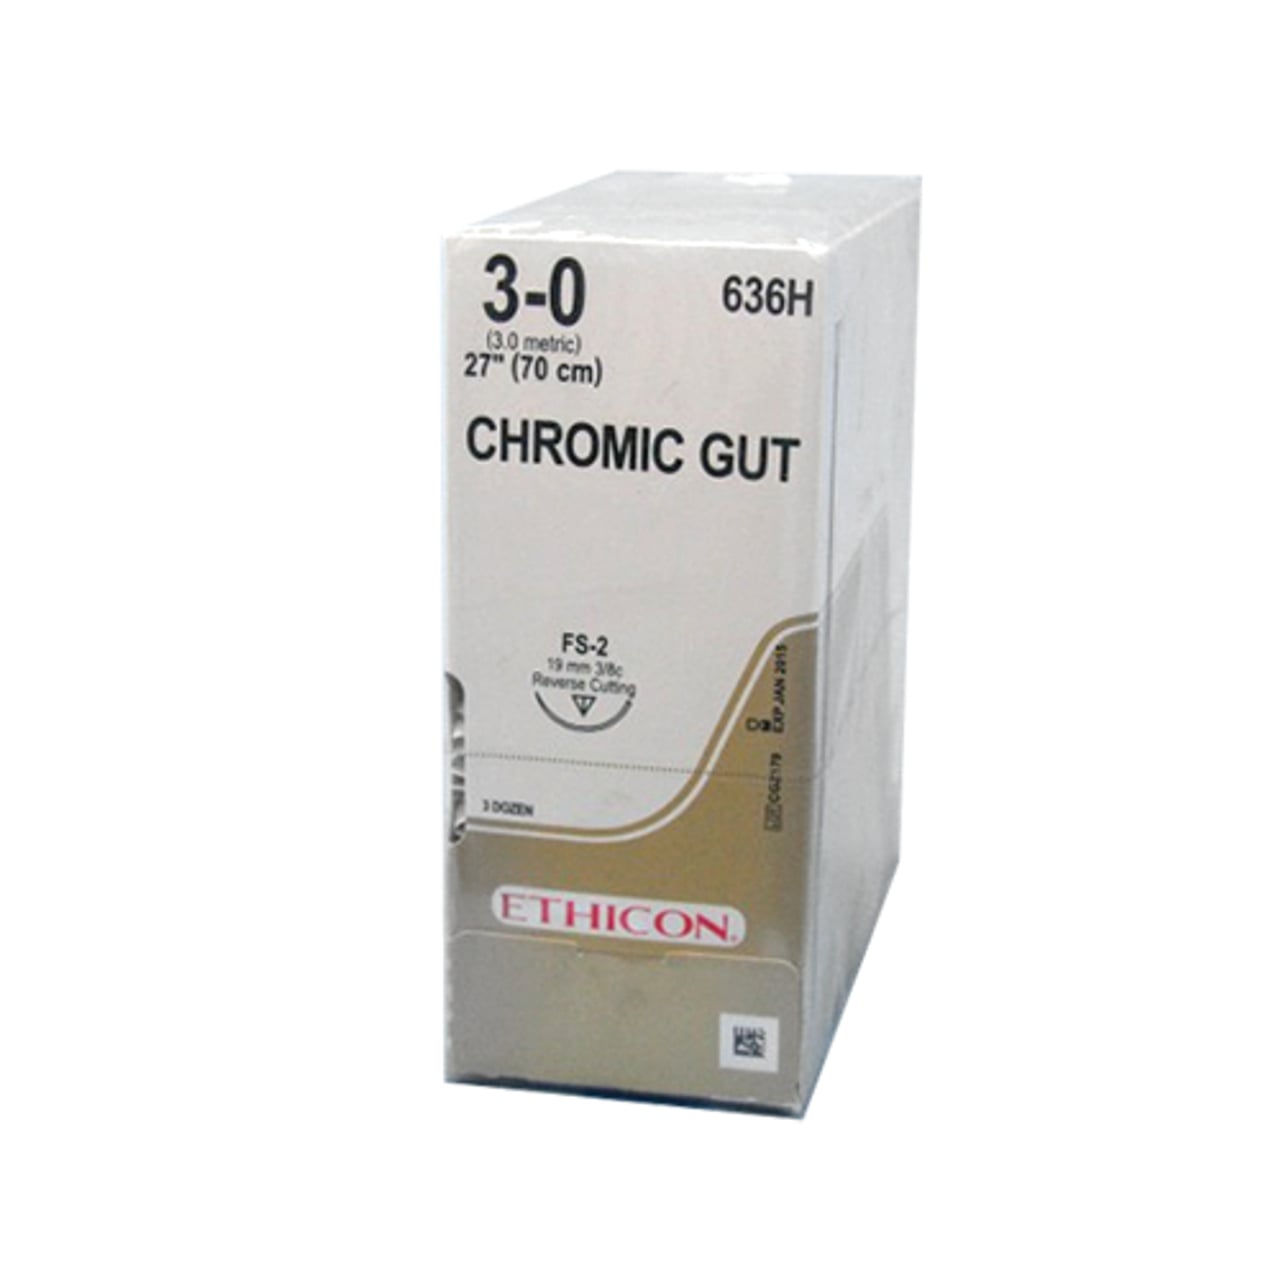 ethicon-chromic-gut-suture-30-27-absorbable-sutures